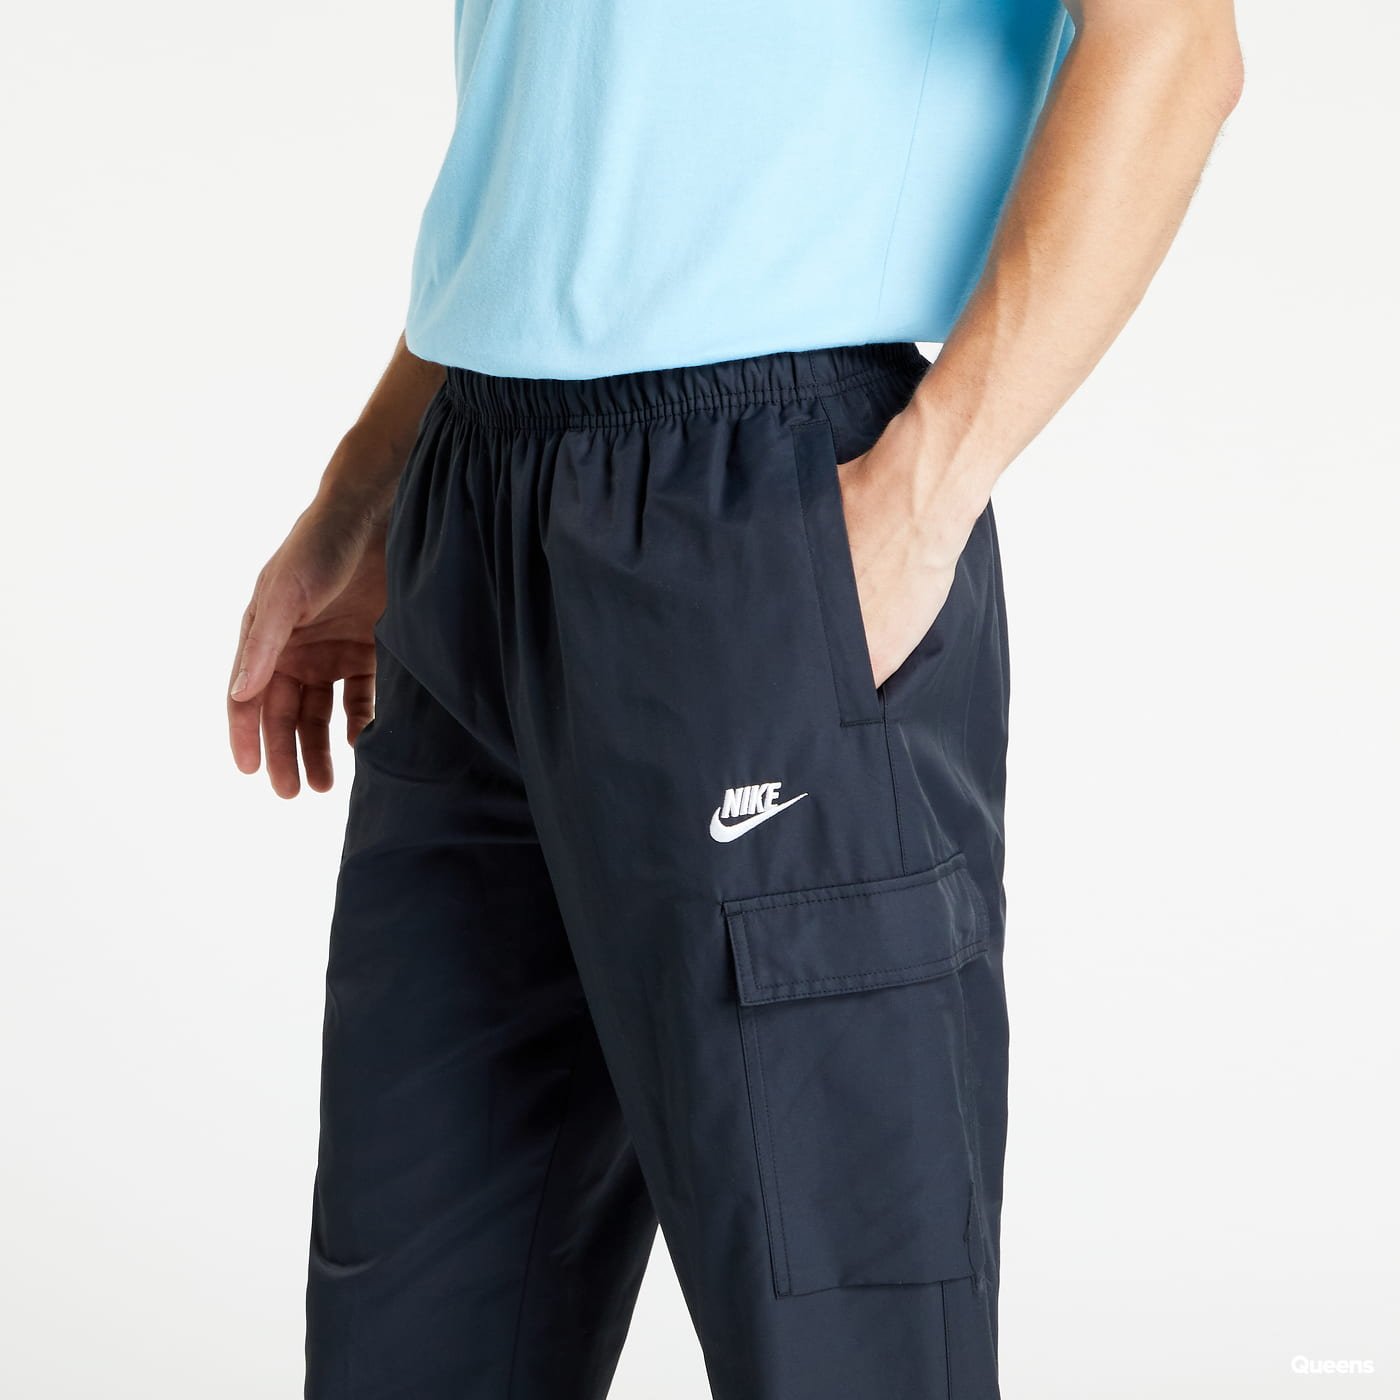 Repeat Woven Trousers